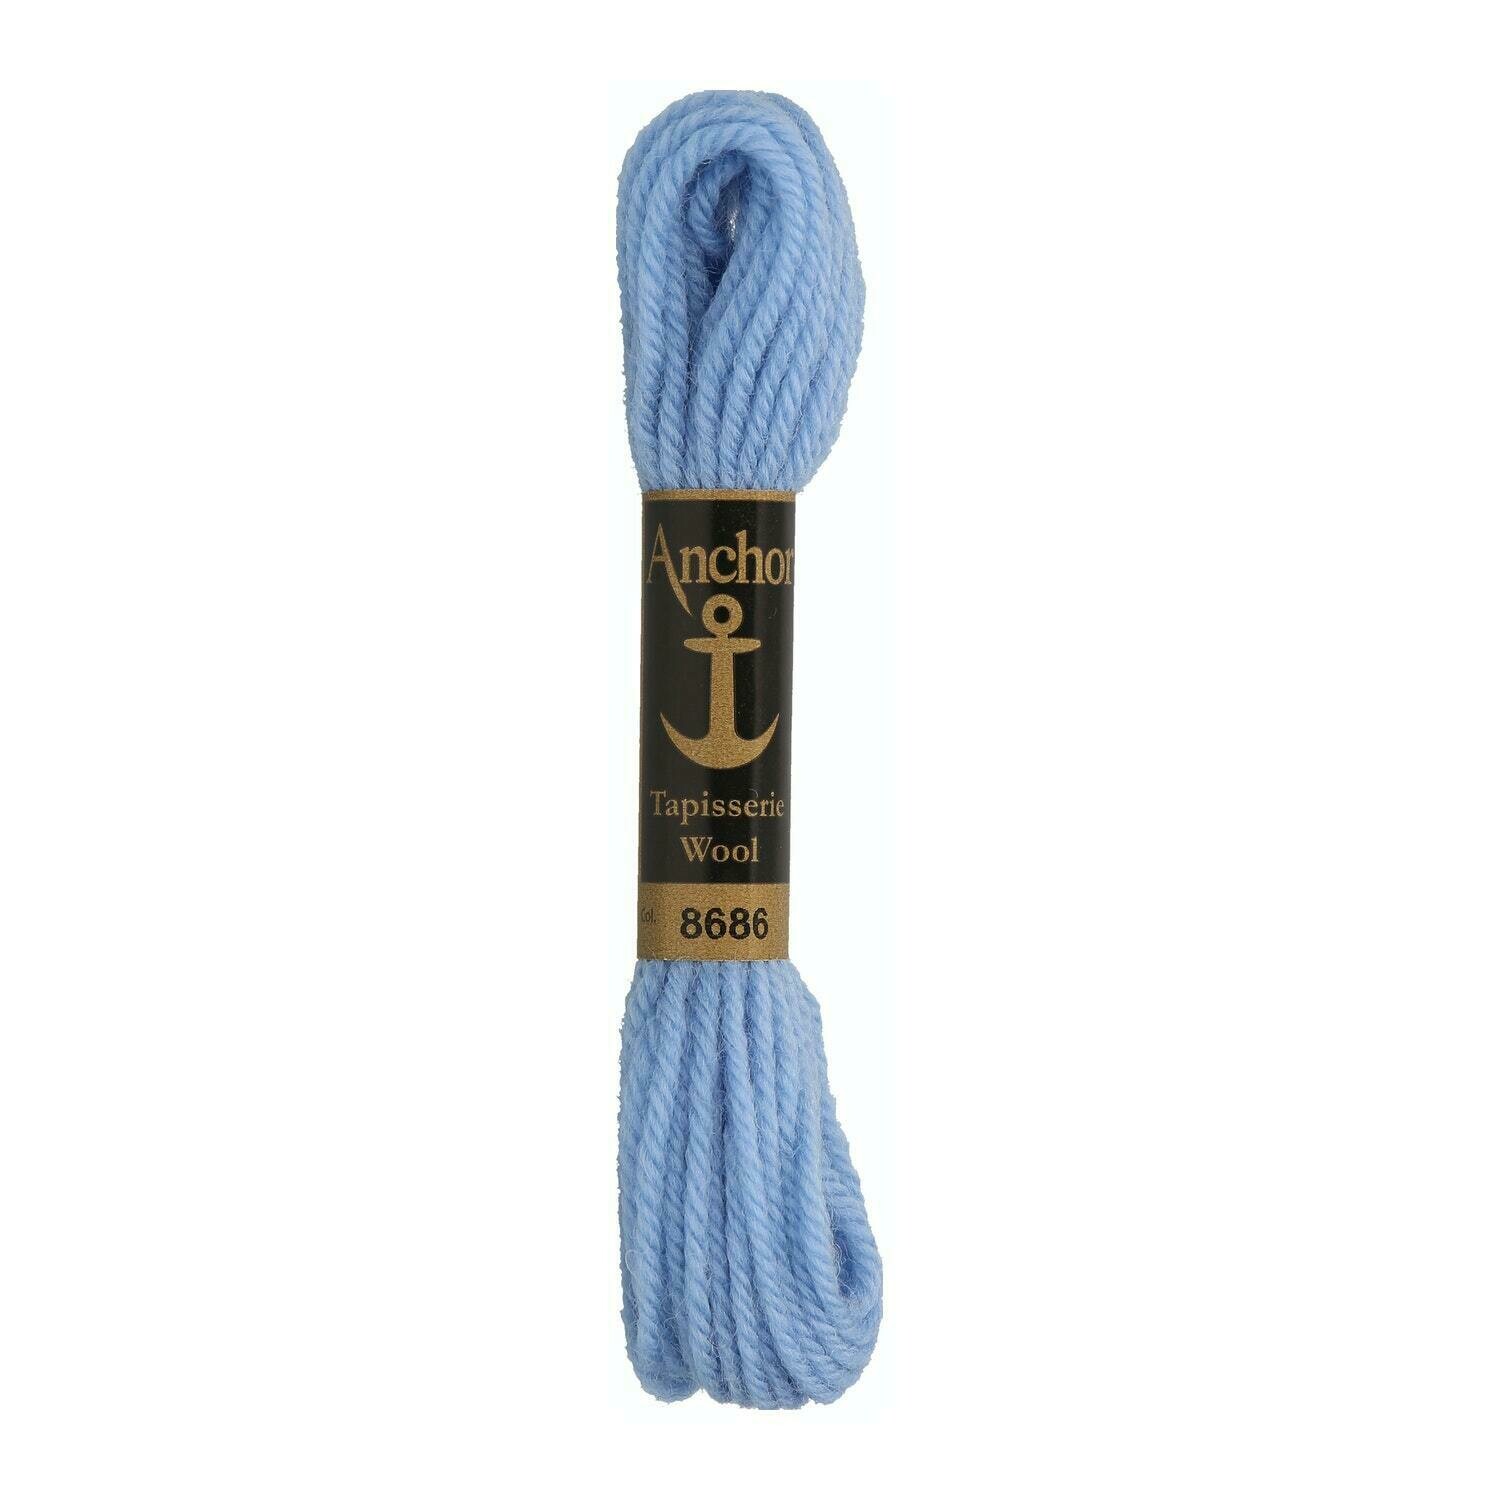 Anchor Tapisserie Wool #08686